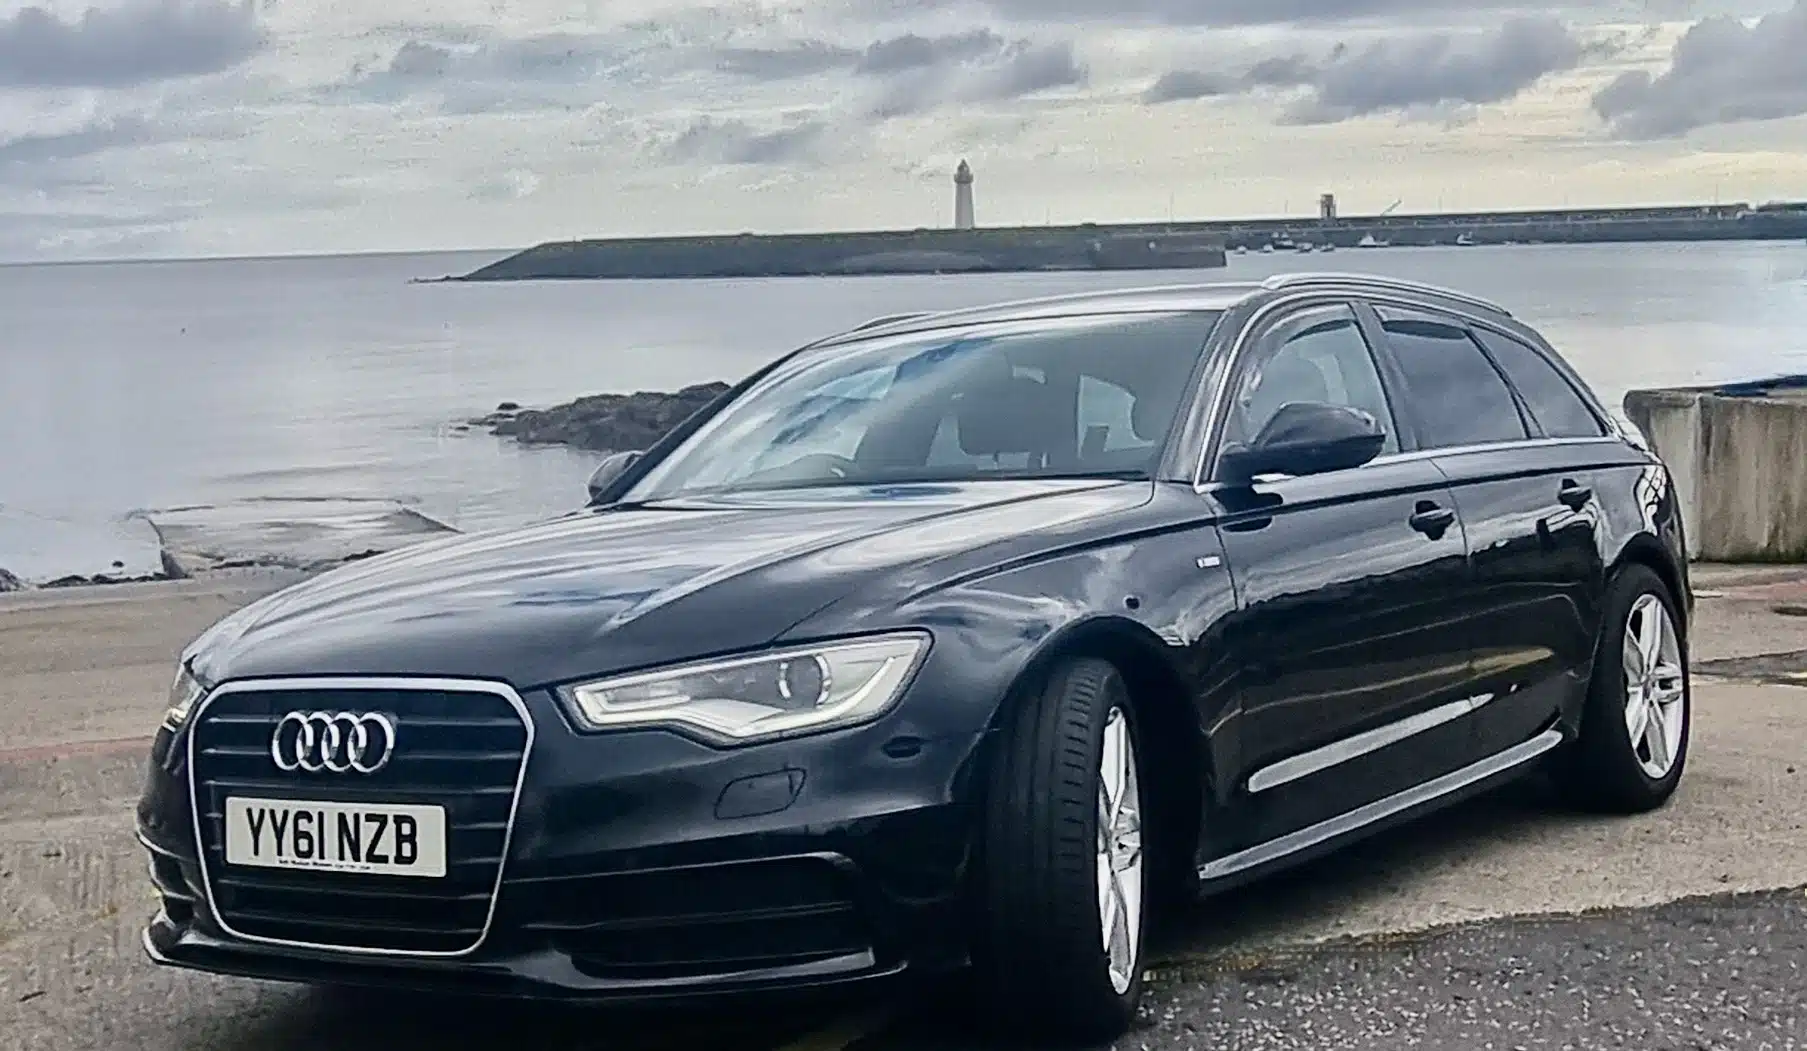 Game of Thrones - Audi A6